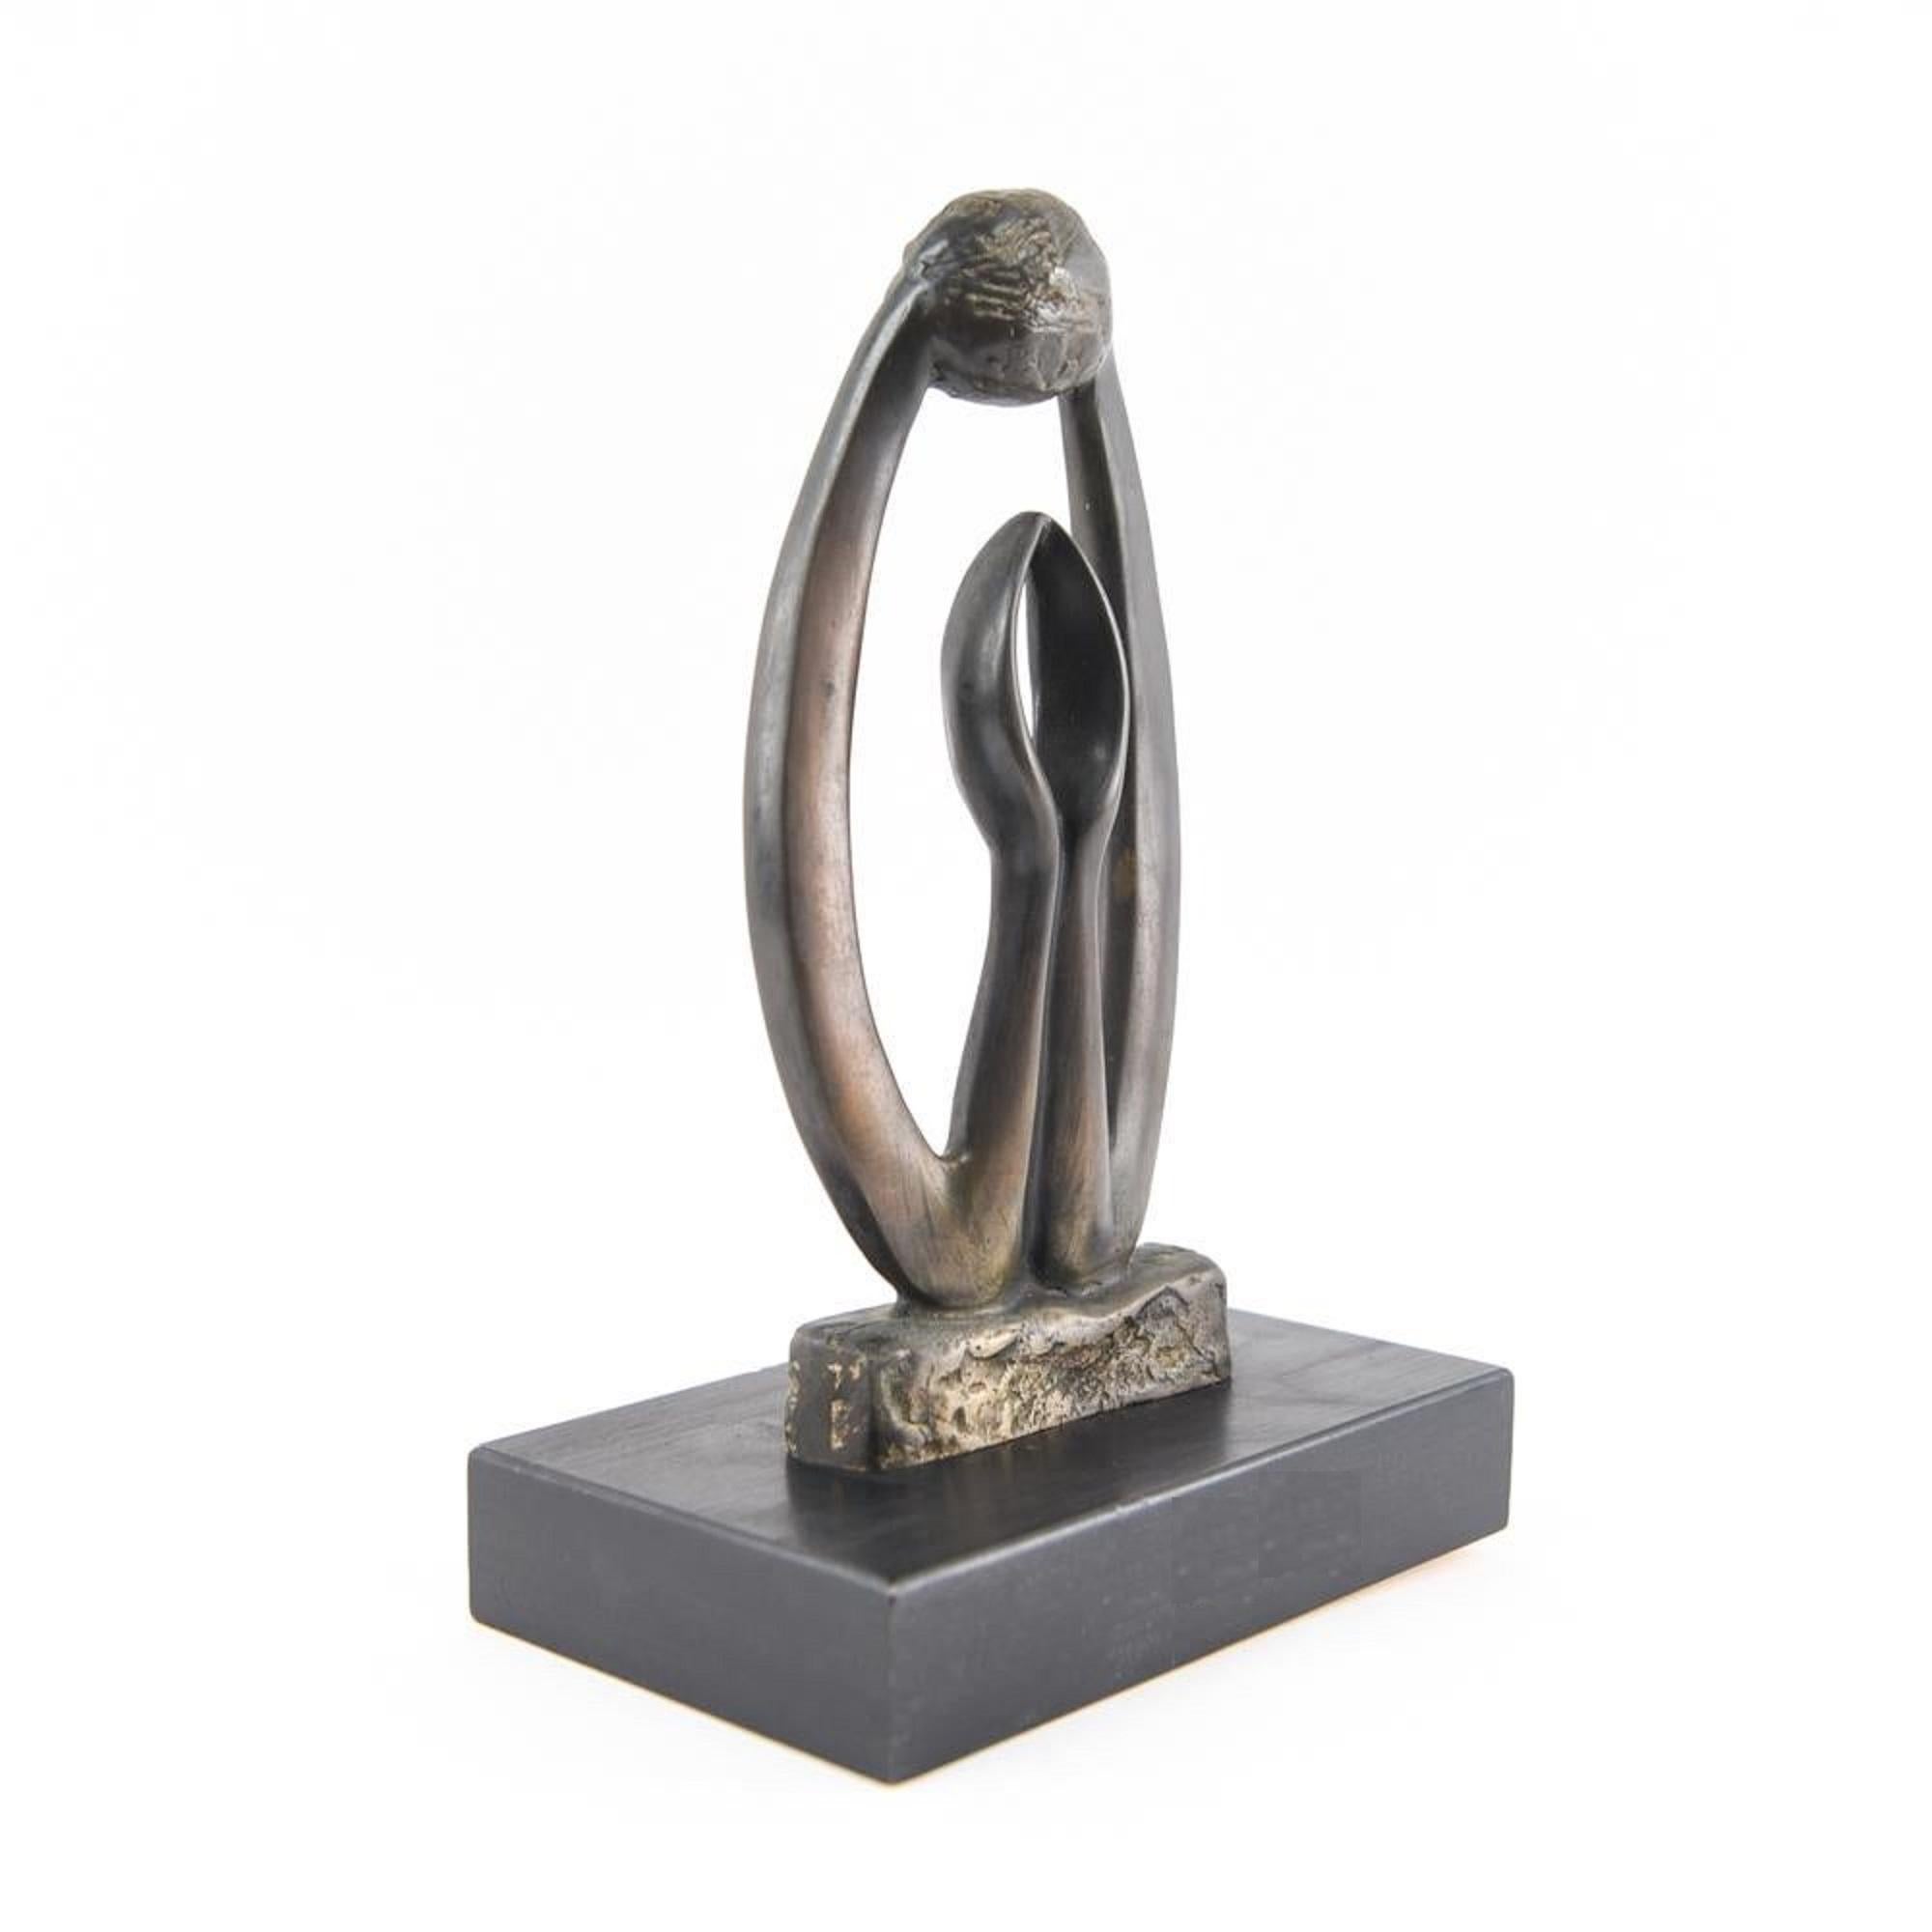 Abstract figurative bronze. Signed on back and numbered.  

Yael Shalev is an Israeli artist, born in Nahalal, and lives and works in Tel Aviv.
Sculptor. She graduated from the Bat-Yam Institute of Plastic Arts and worked under the guidance of Jacob